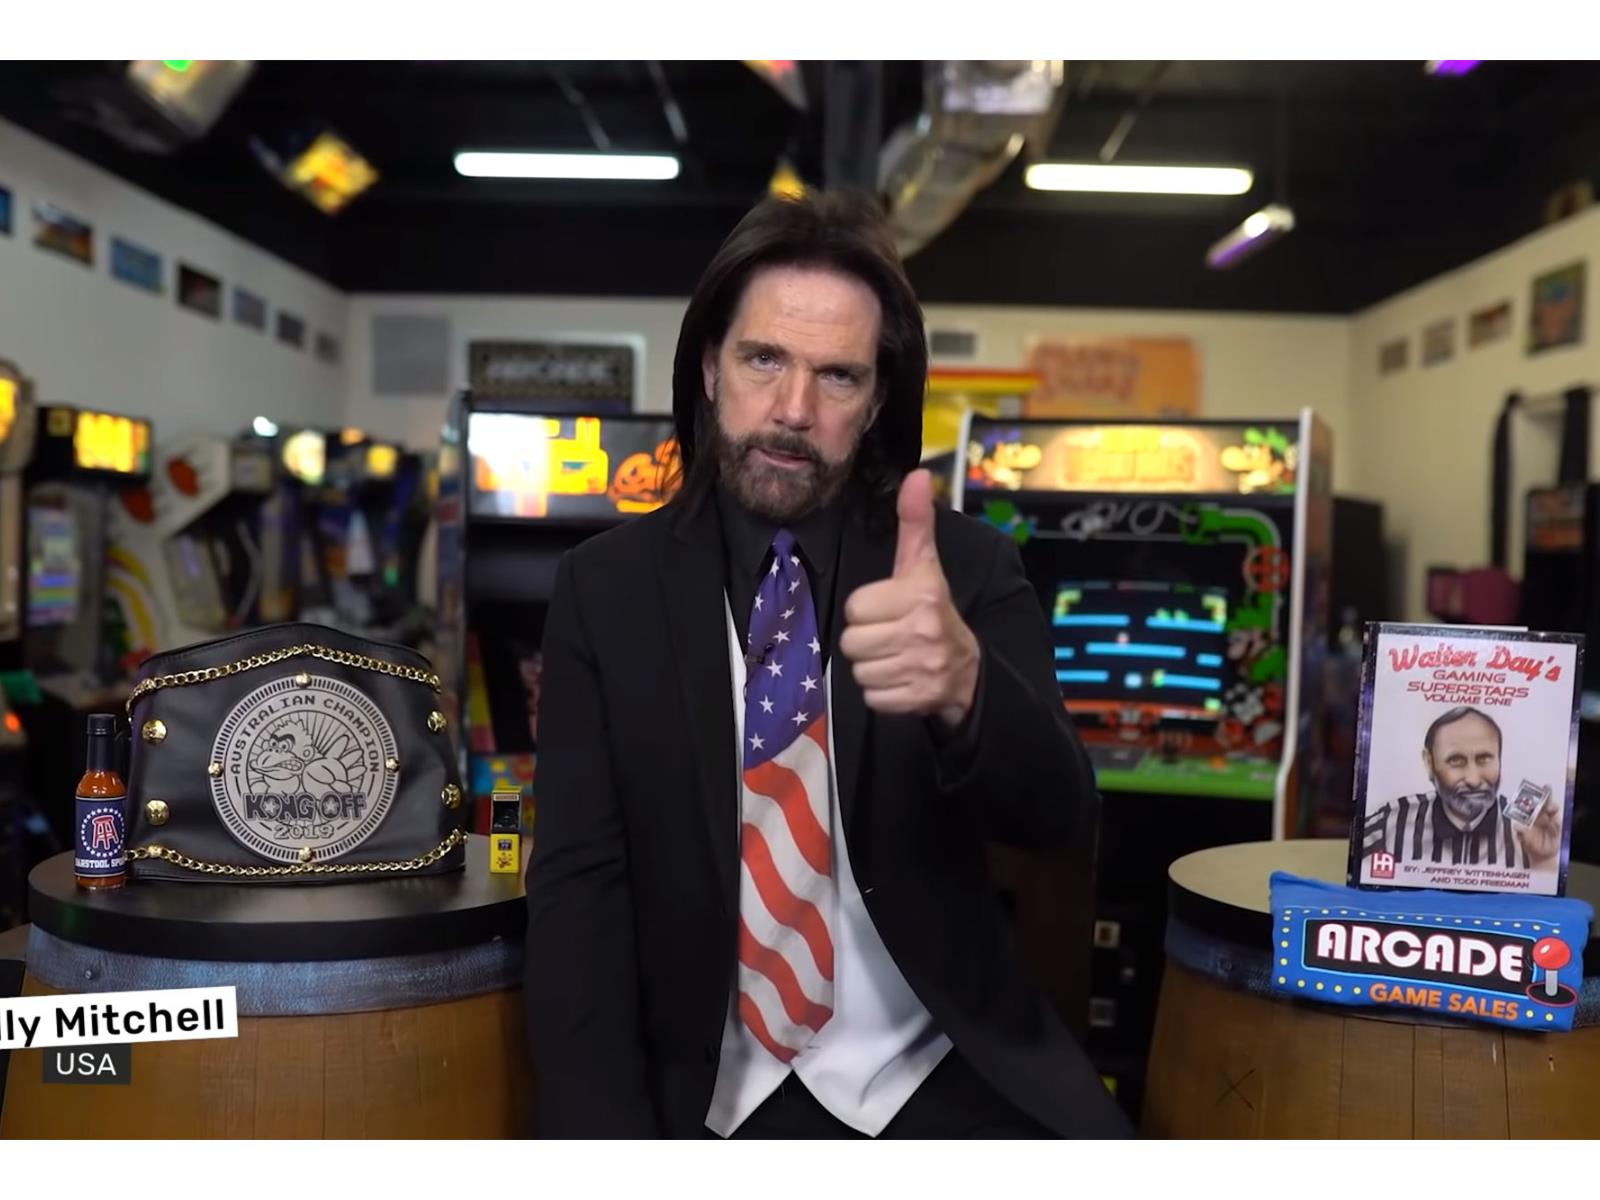 Twin Galaxies Reinstates Disgraced Gamer Billy Mitchell's Records With A Key Caveat